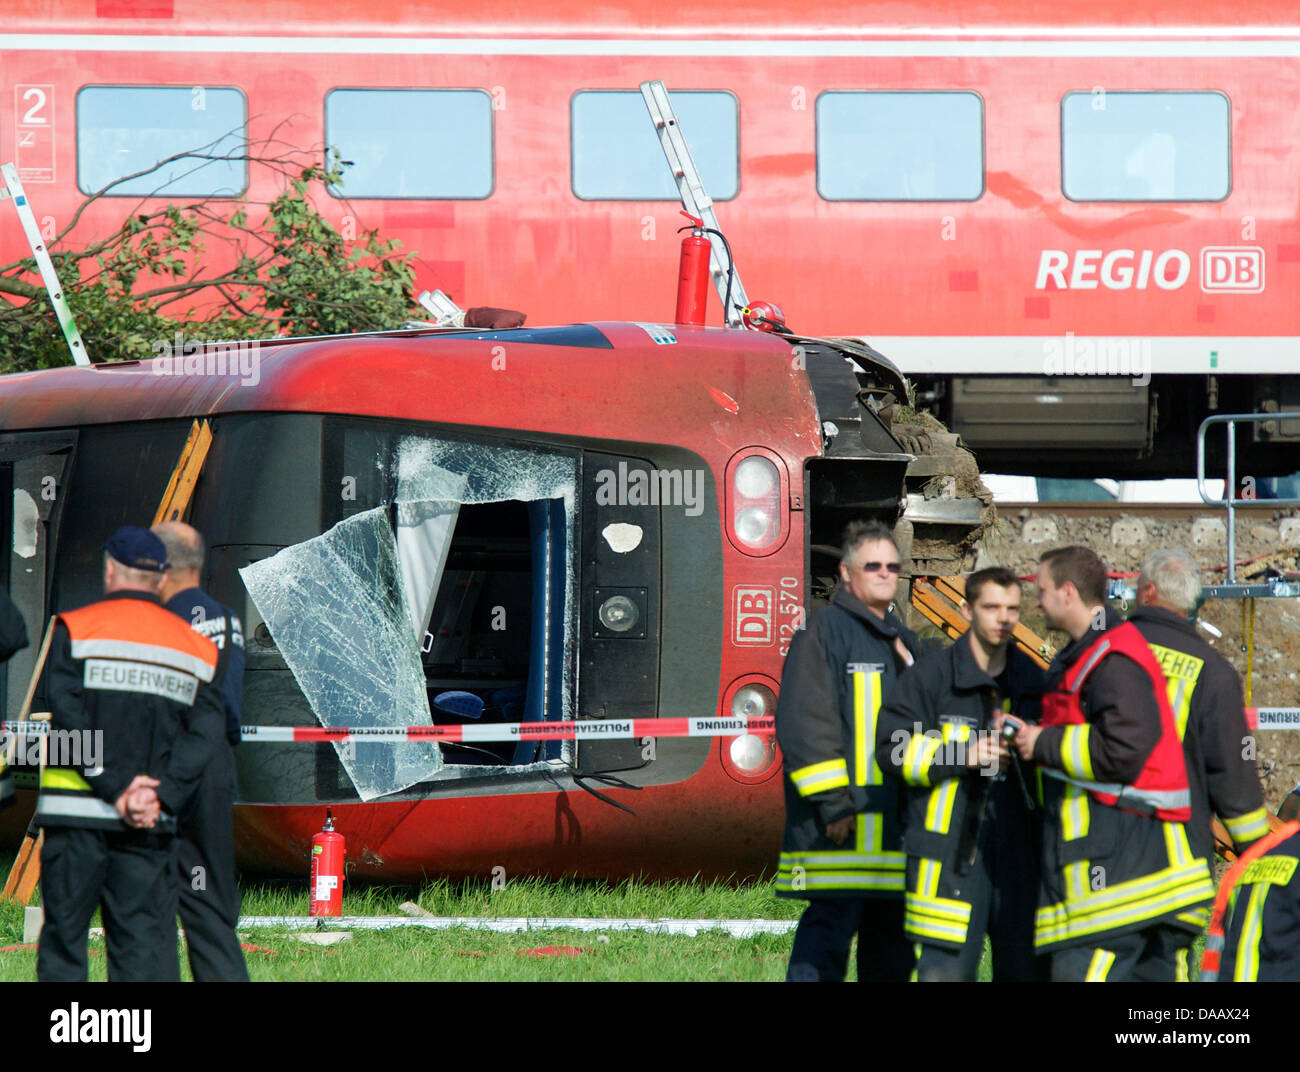 Rescue teams stand next to a demlished train after an accident in Lauterbach, Germany, 20 September 2011. A regional express crashed into a car around one p.m. and the first three coaches derailed. Numerous people were injured during the accident. Peter Endig Stock Photo